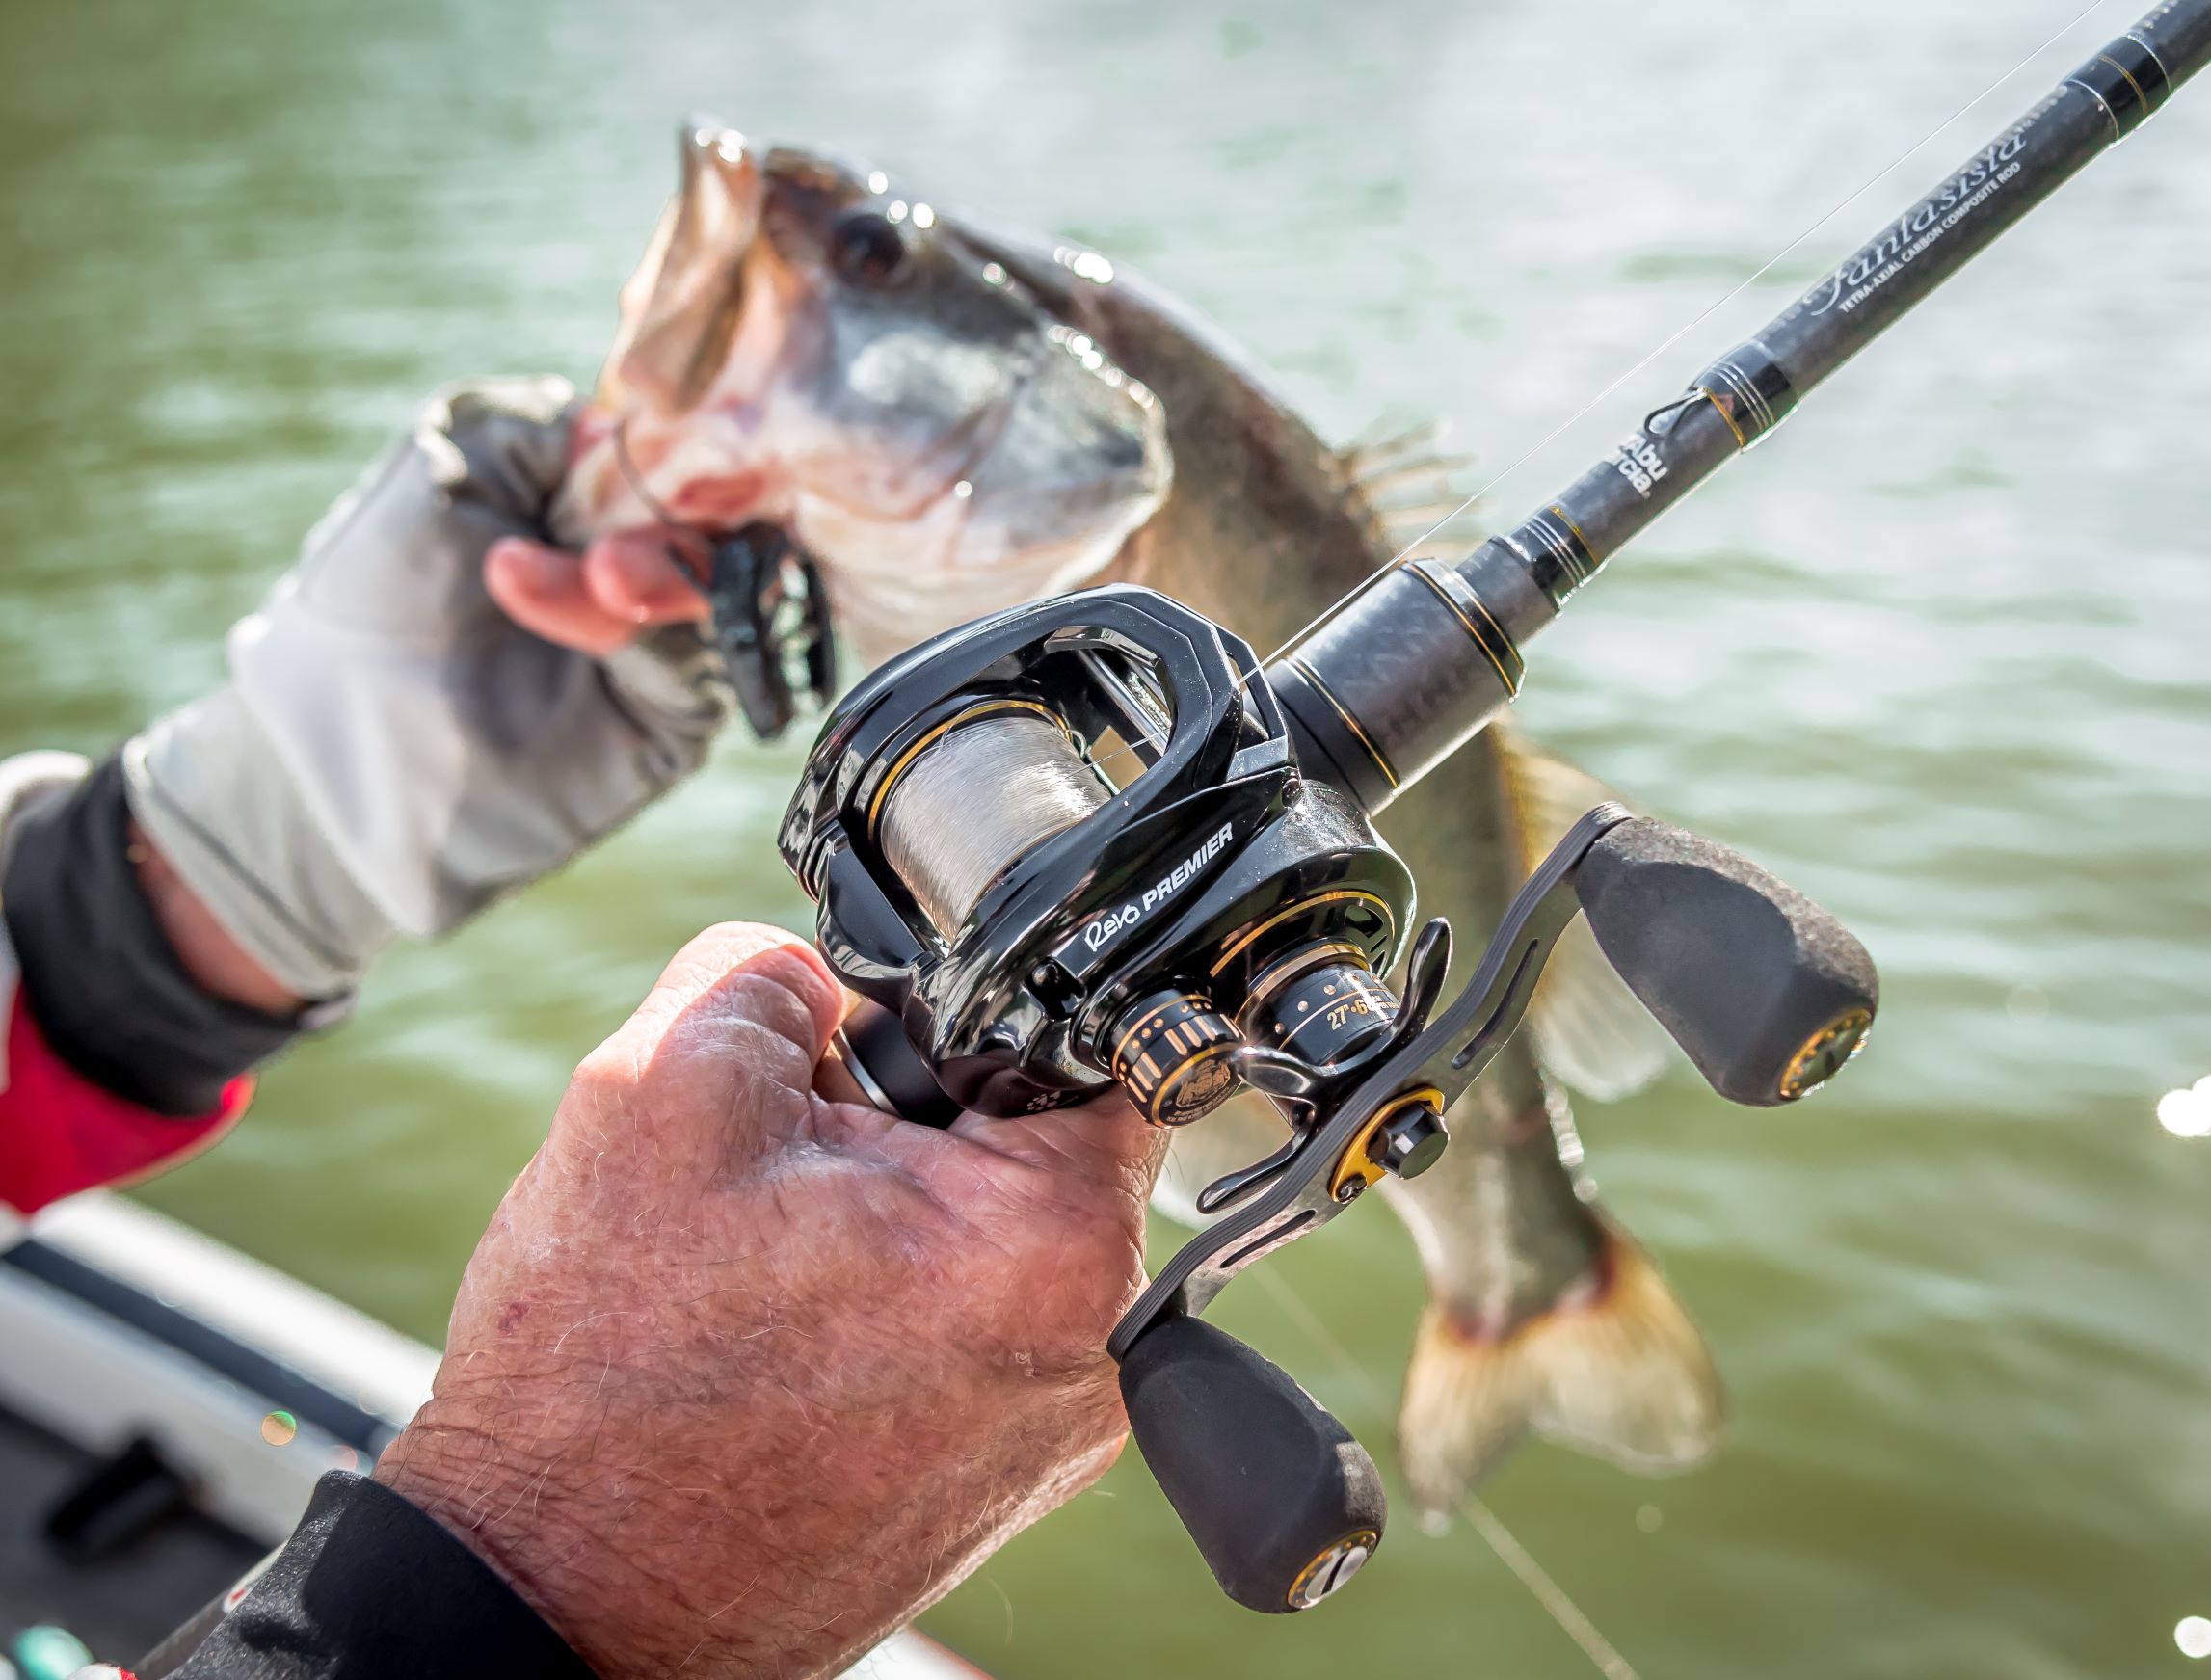 Abu Garcia on X: The Revo Premier and Fantasista rod; uncompromising  power, precision engineering and performance all in the palm of your hand.  #AbuGarcia #AbuGarciaForLife #RevoPremier #Fantasista   / X